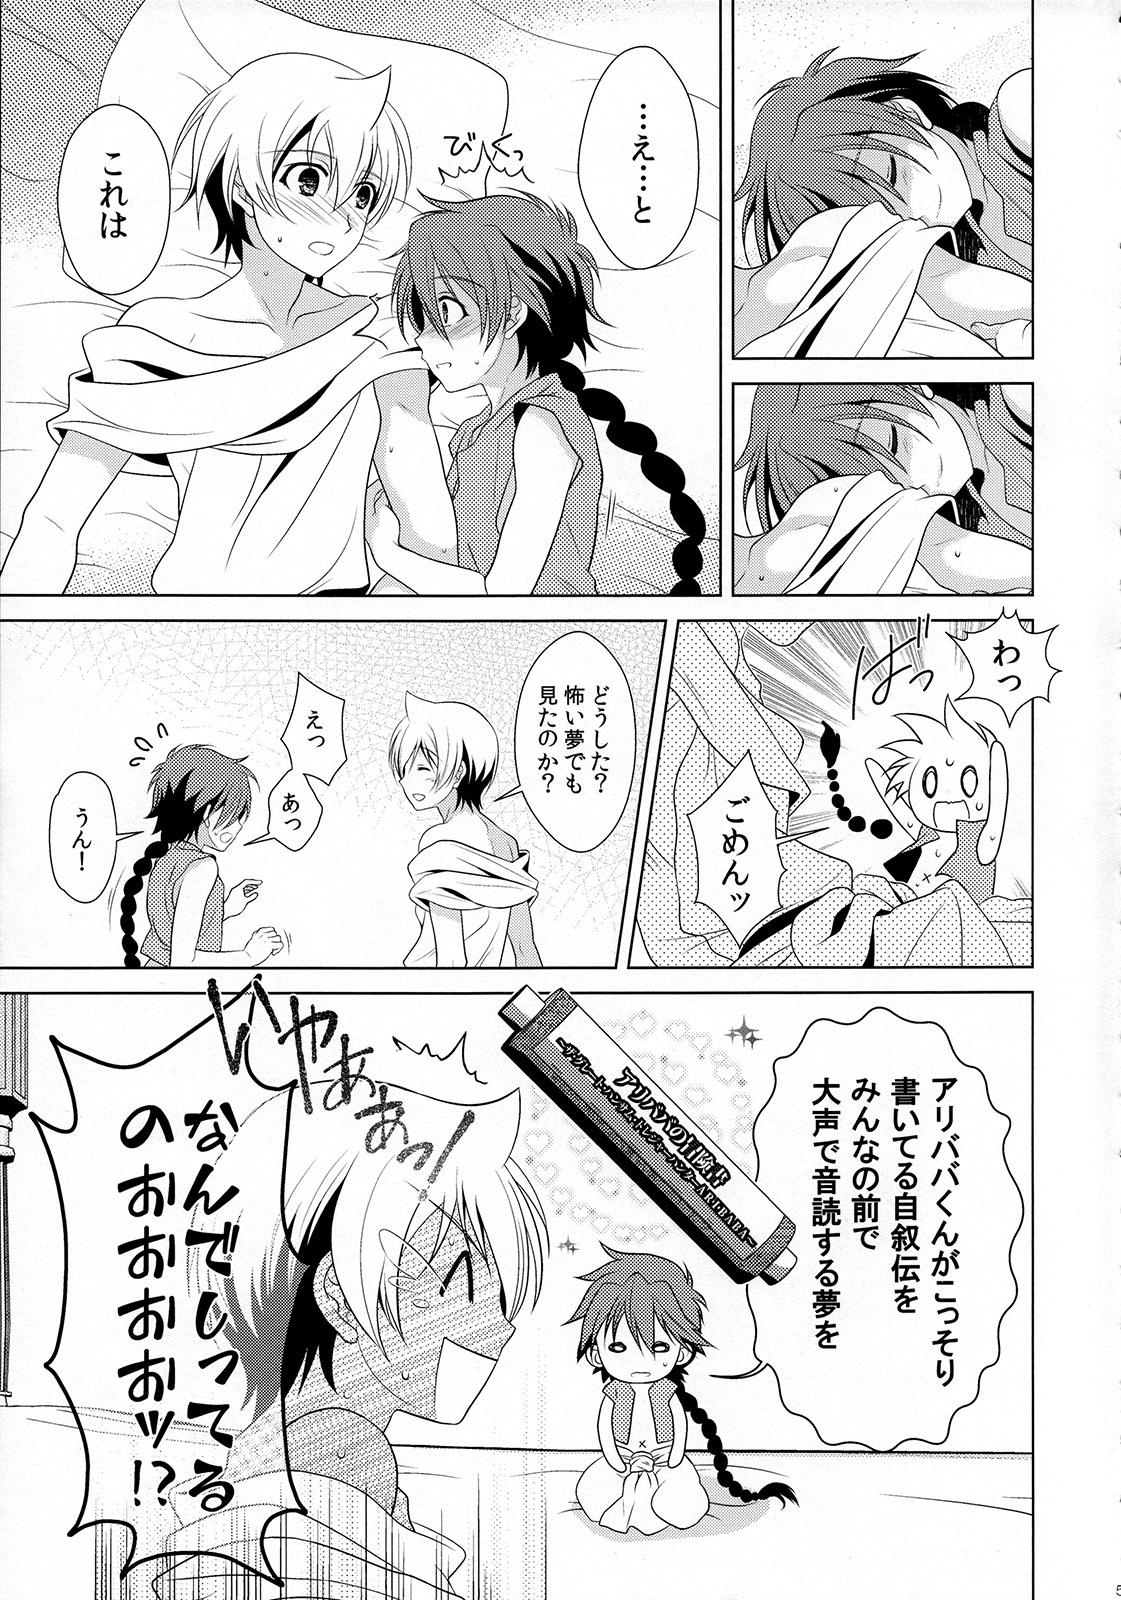 Swallowing Magical Zundoko Fire - Magi the labyrinth of magic Livecams - Page 5